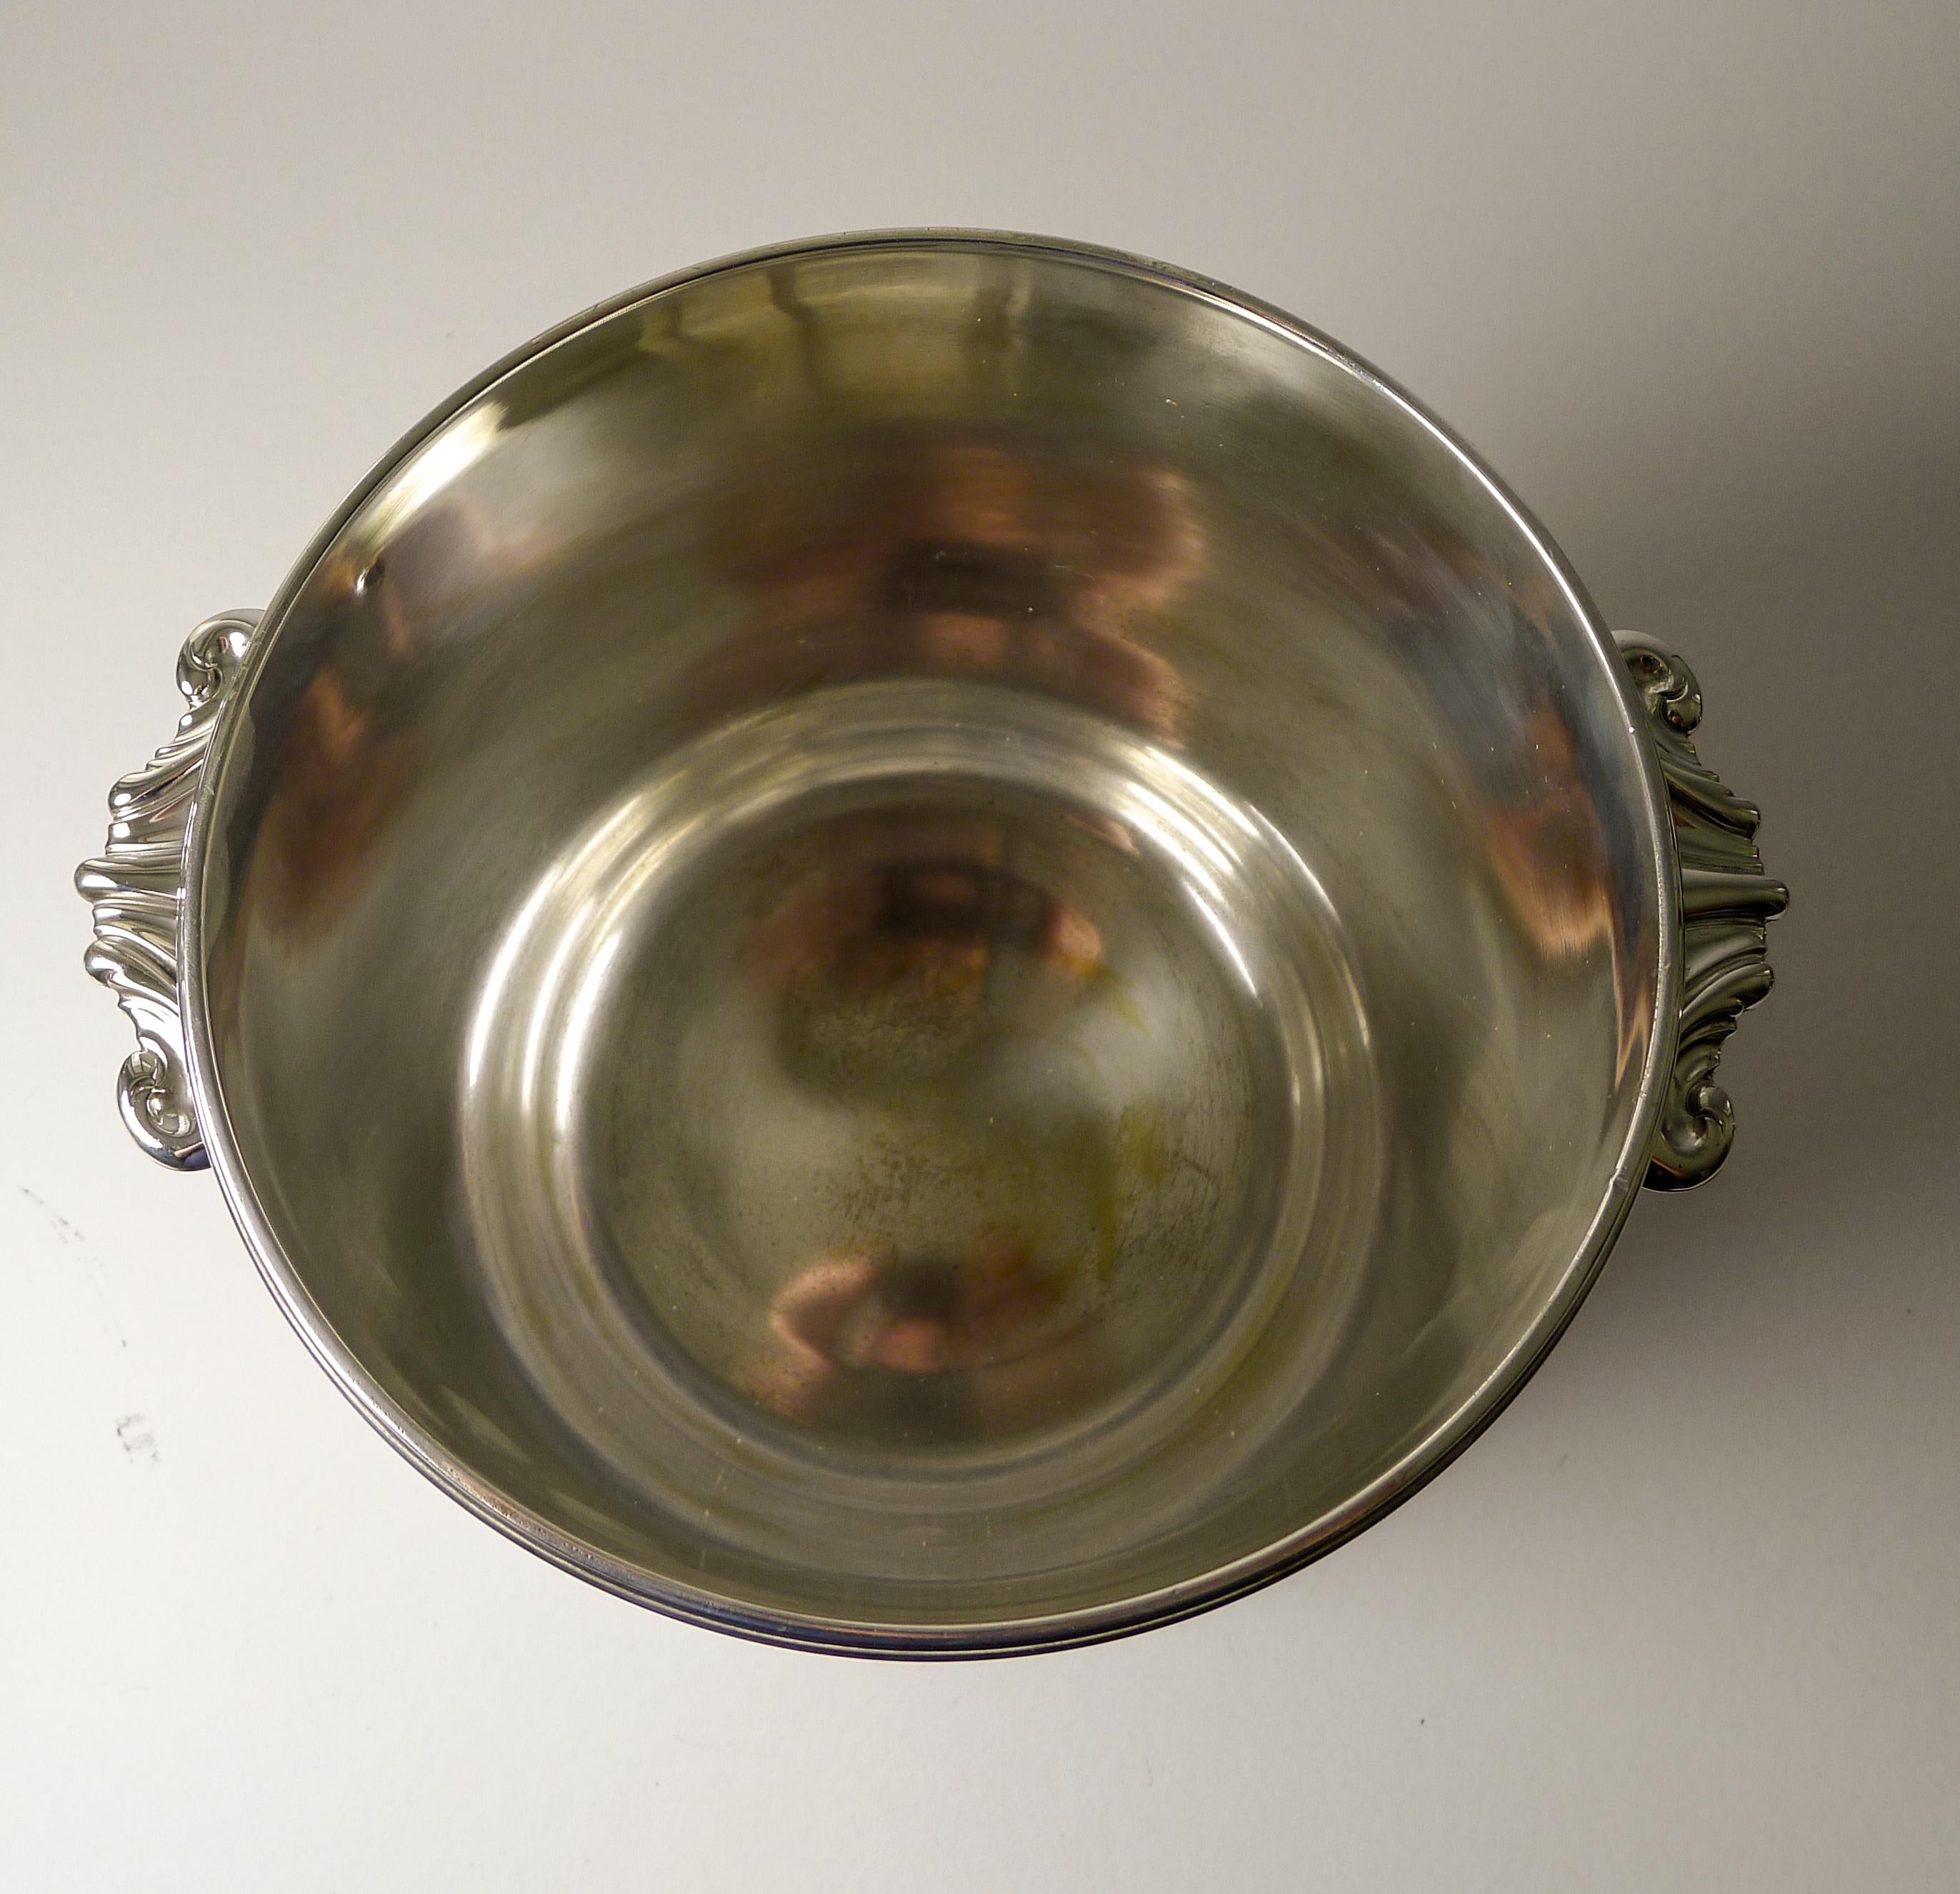 Vintage French Silver Plated Wine or Champagne Cooler / Bucket, Puiforcat For Sale 4